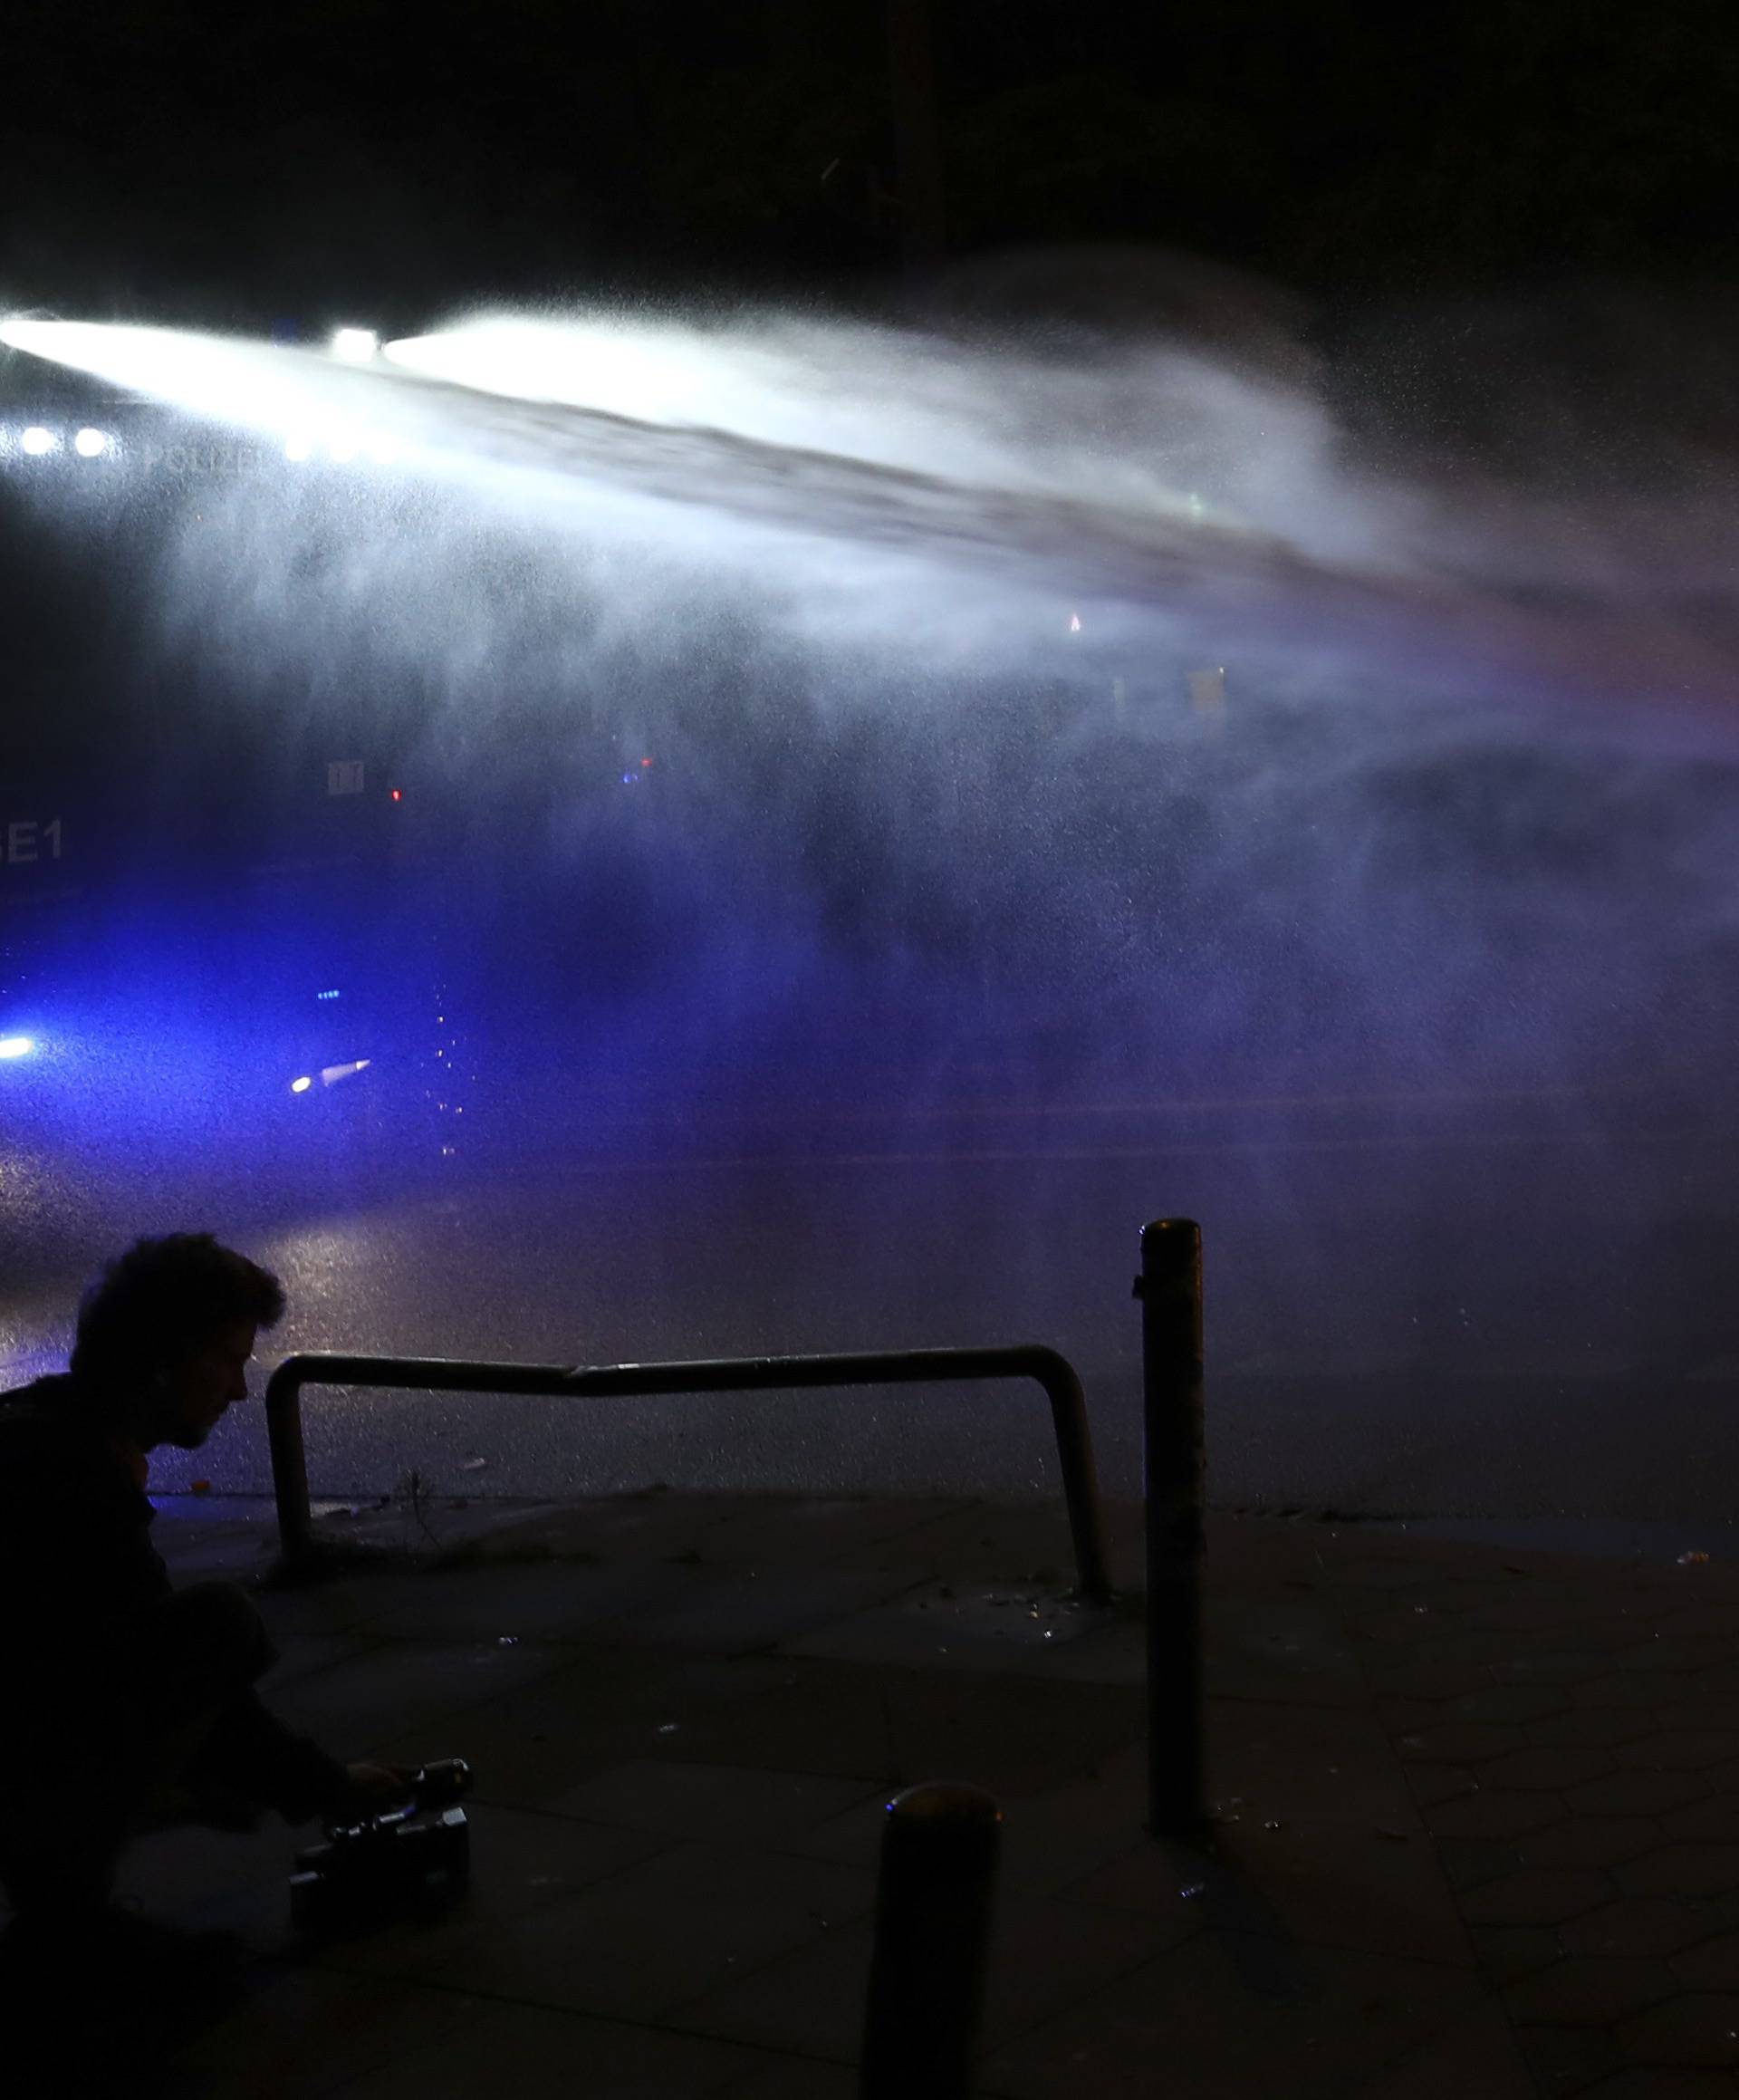 Police uses a water cannon to extinguish a burning barricade following the G20 summit in Hamburg